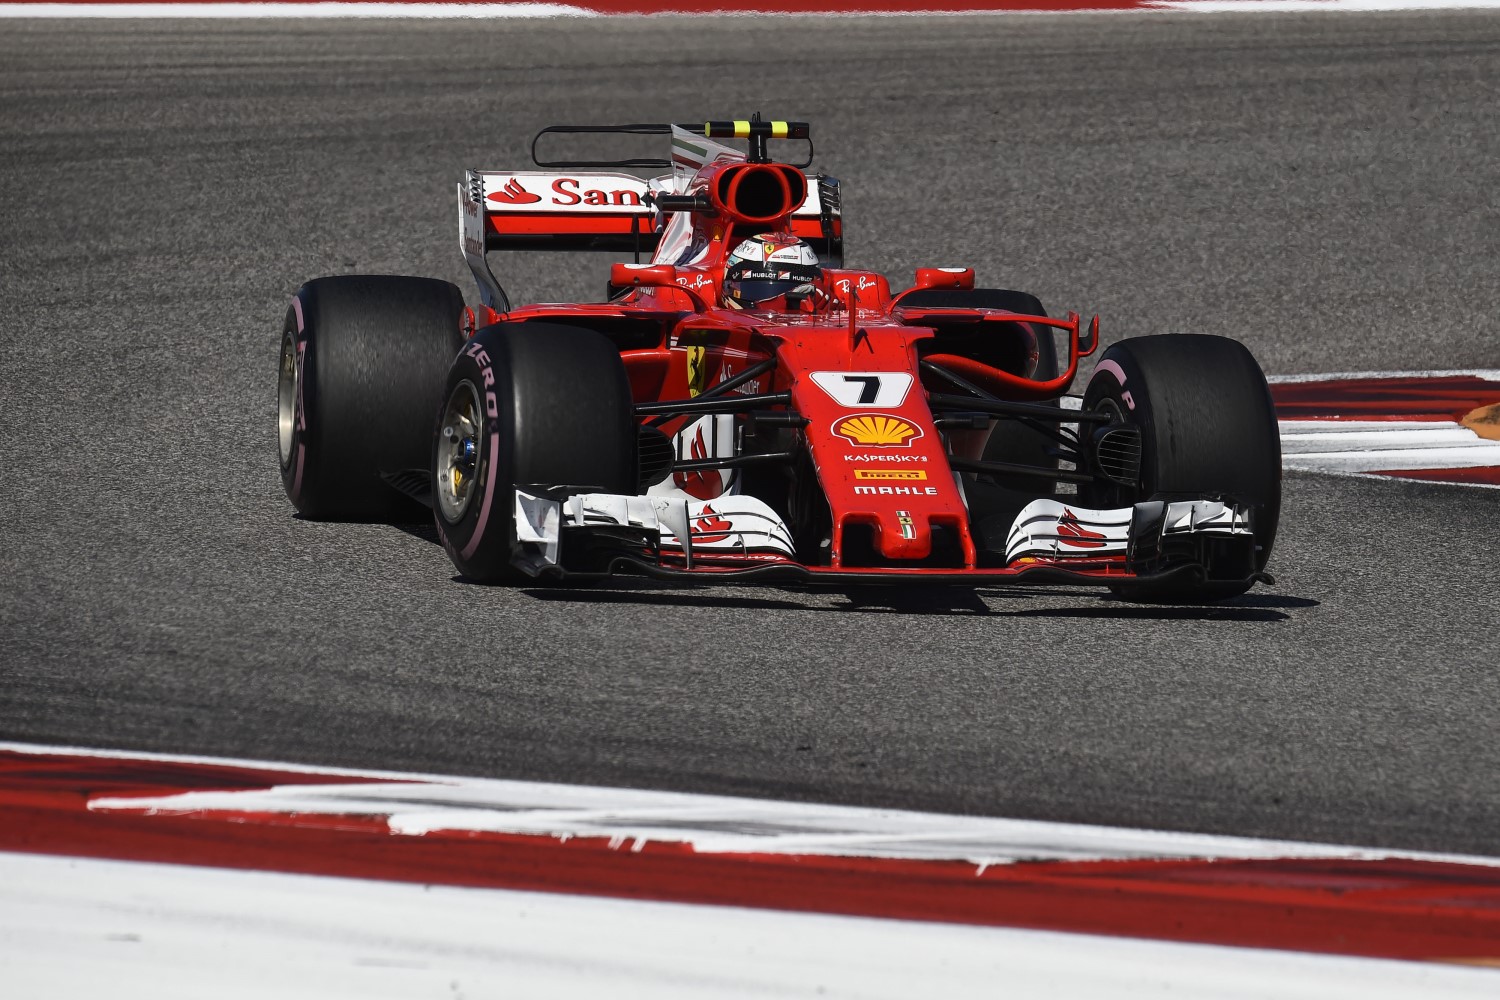 Raikkonen was out of tires and a sitting duck on the final lap